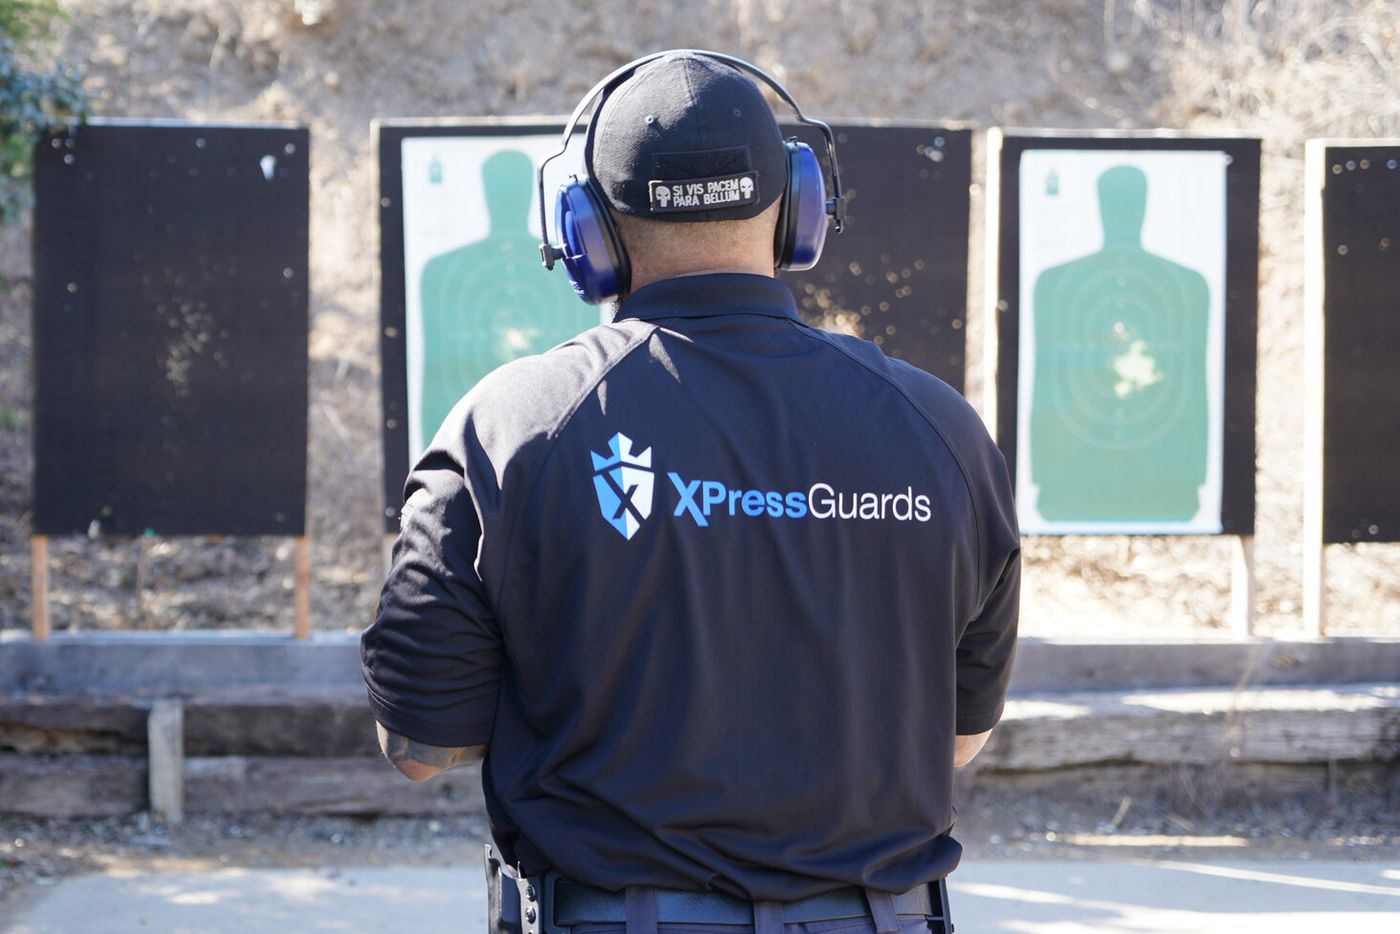 Armed Security Guards | Security Guard Company • XPressGuards